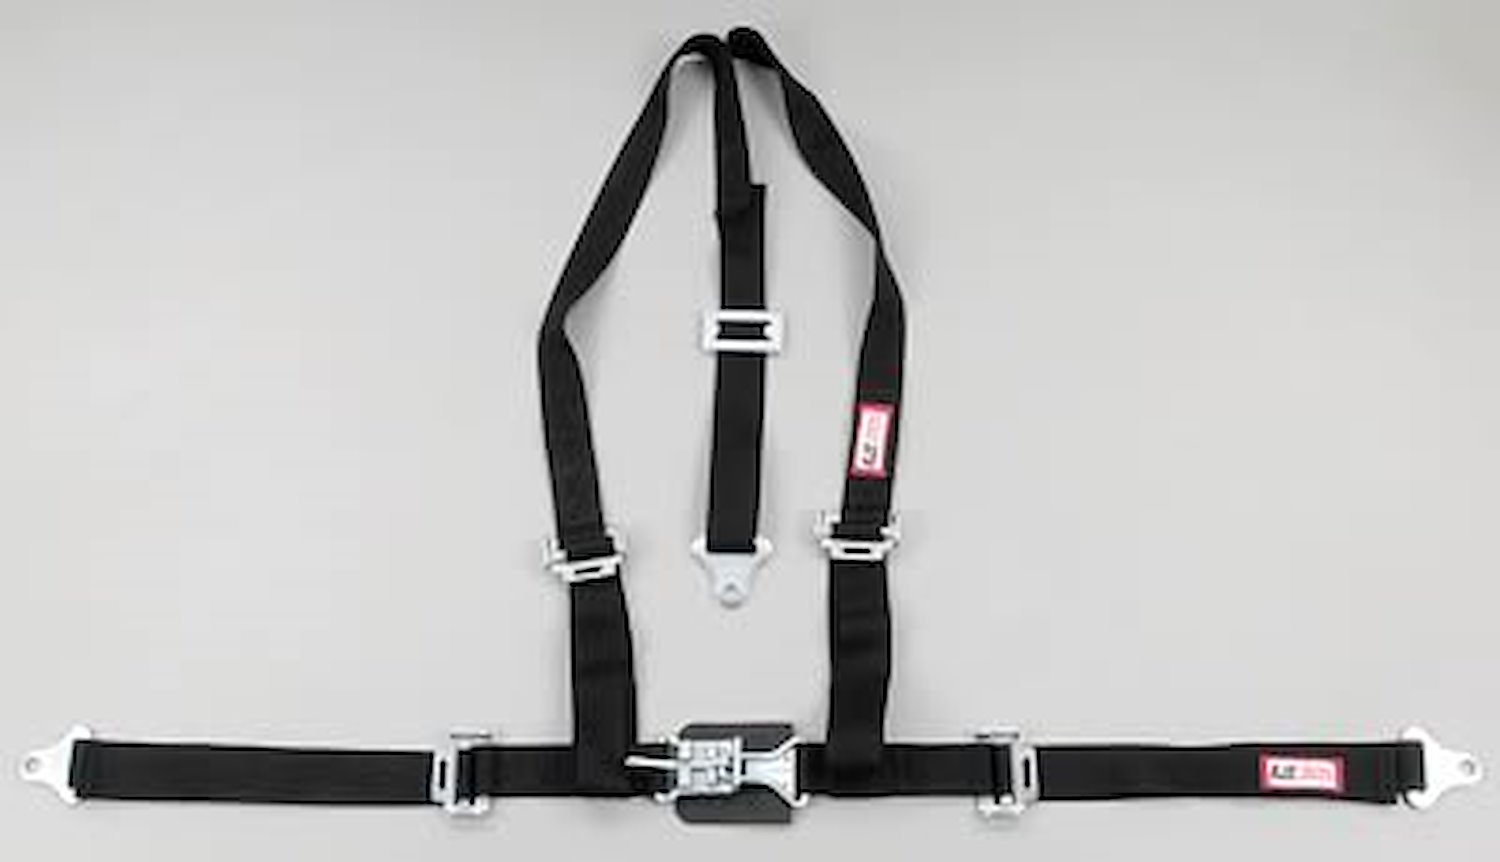 NON-SFI L&L HARNESS 3 PULL UP Lap BELT SNAP SEWN IN 2 S.H. Y FLOOR Mount WRAP/SNAP GRAY